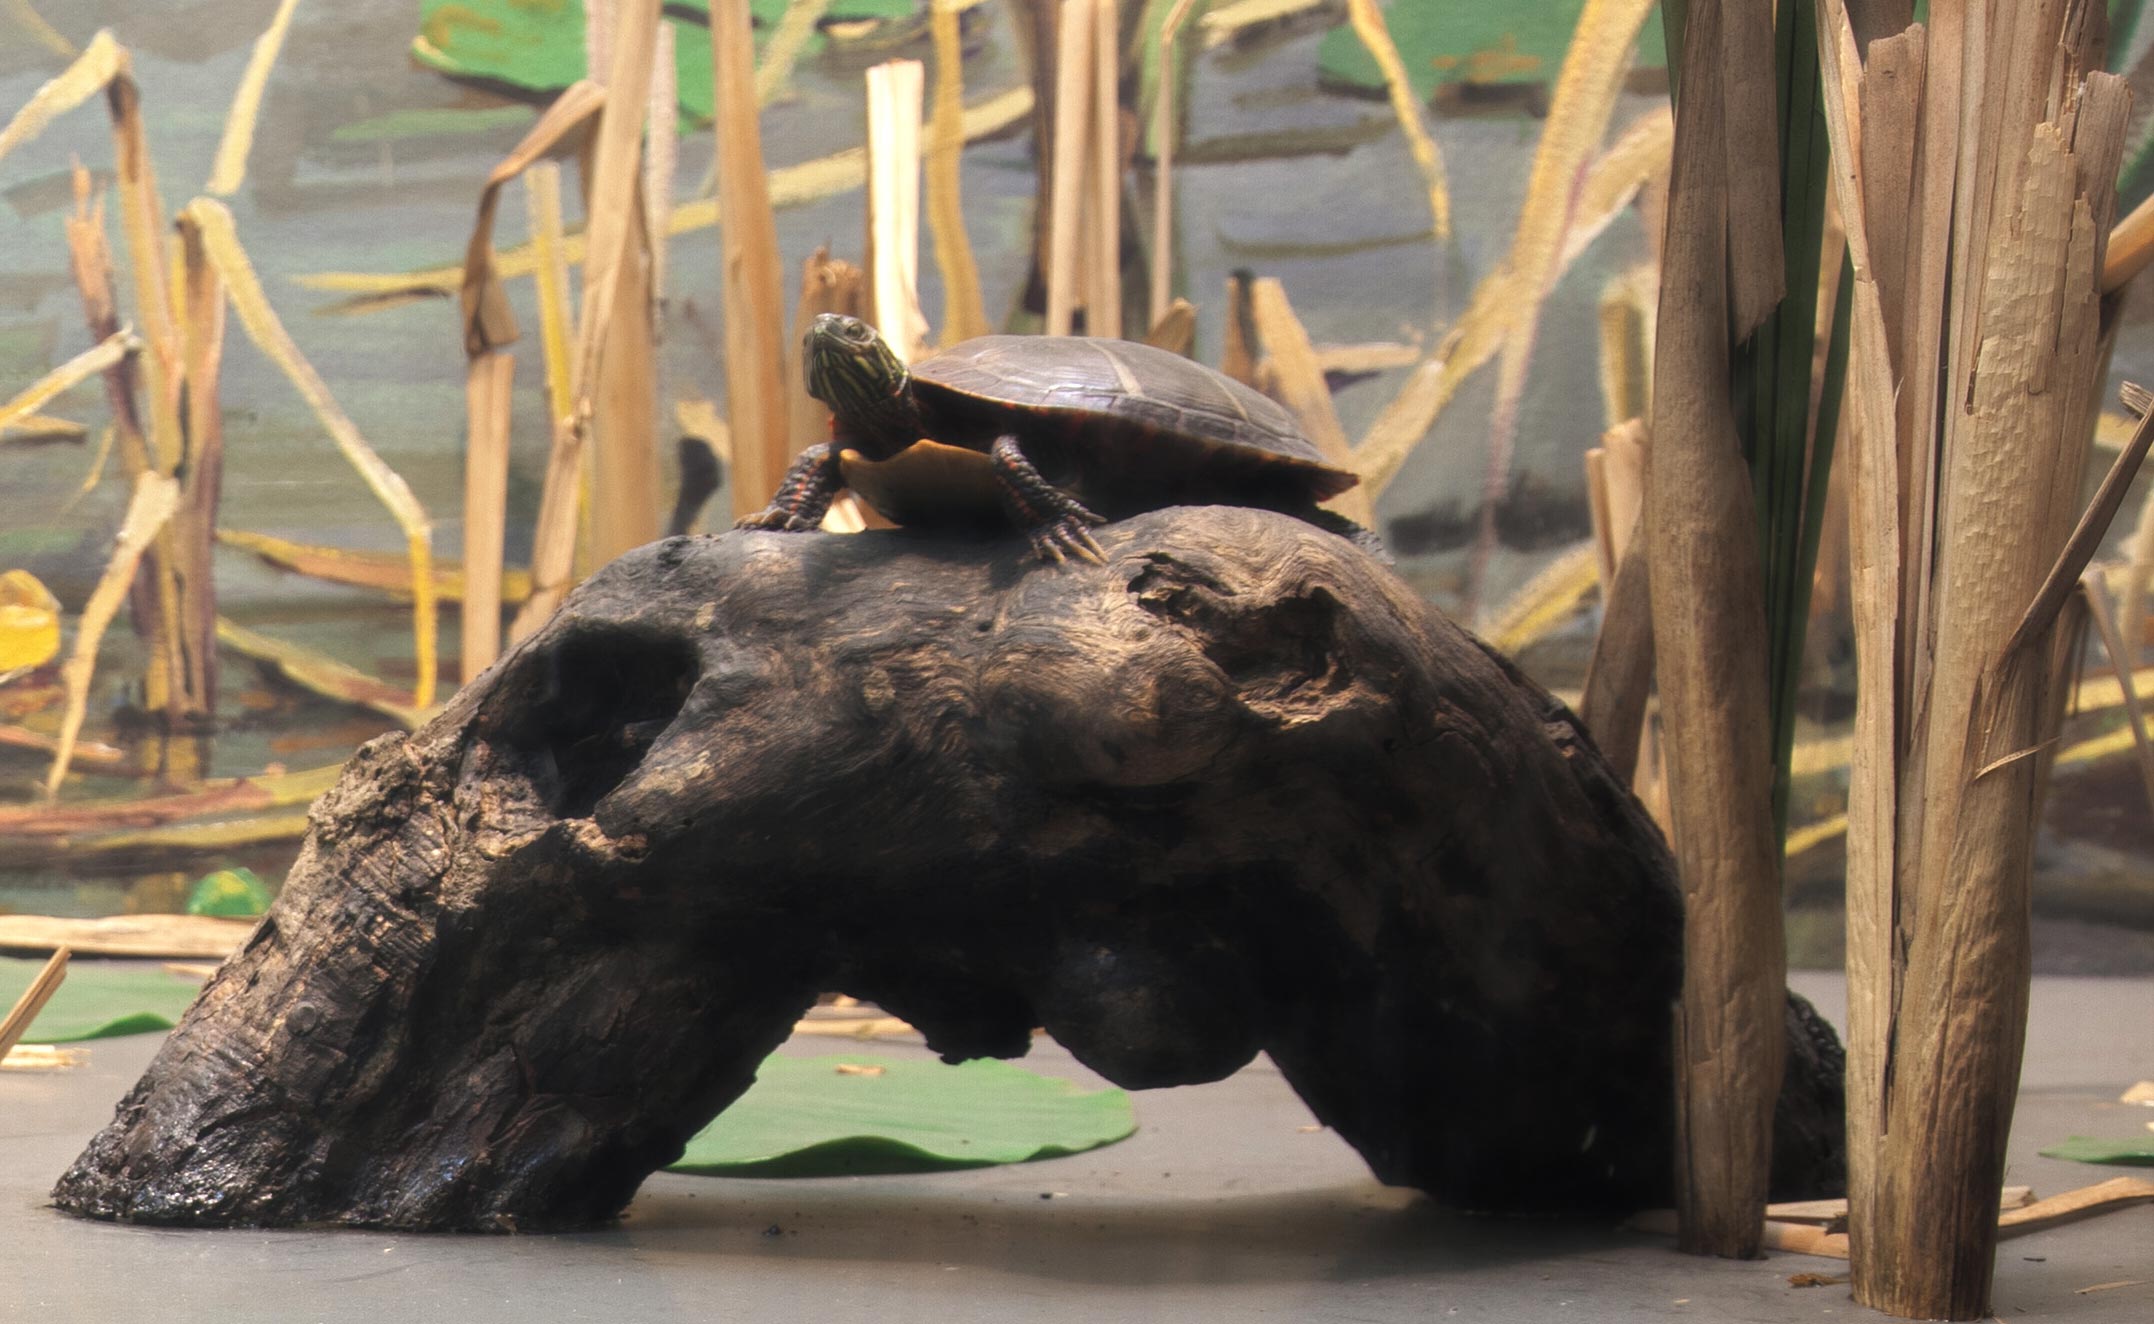 Section of a diorama showing a model of a painted turtle on a log